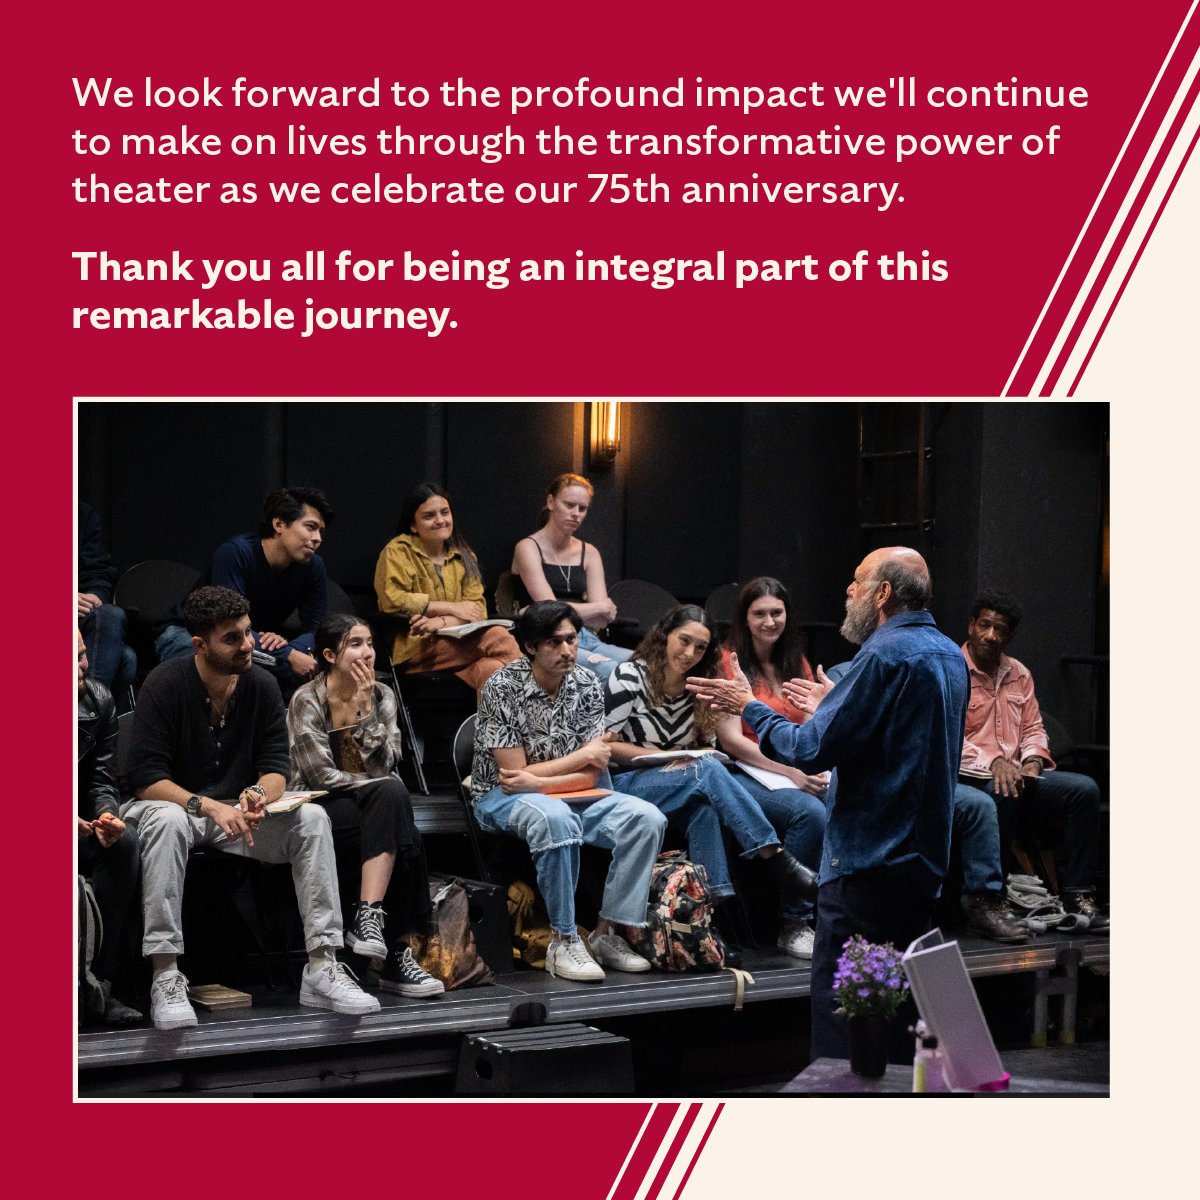 On #GivingTuesday, thanks to all who make our mission a reality. To our incredible donors, dedicated volunteers, amazing faculty, staff, students, alumni & audiences, THANK YOU! Your spirit & collective efforts ignite our work to share human knowledge & democratize theater